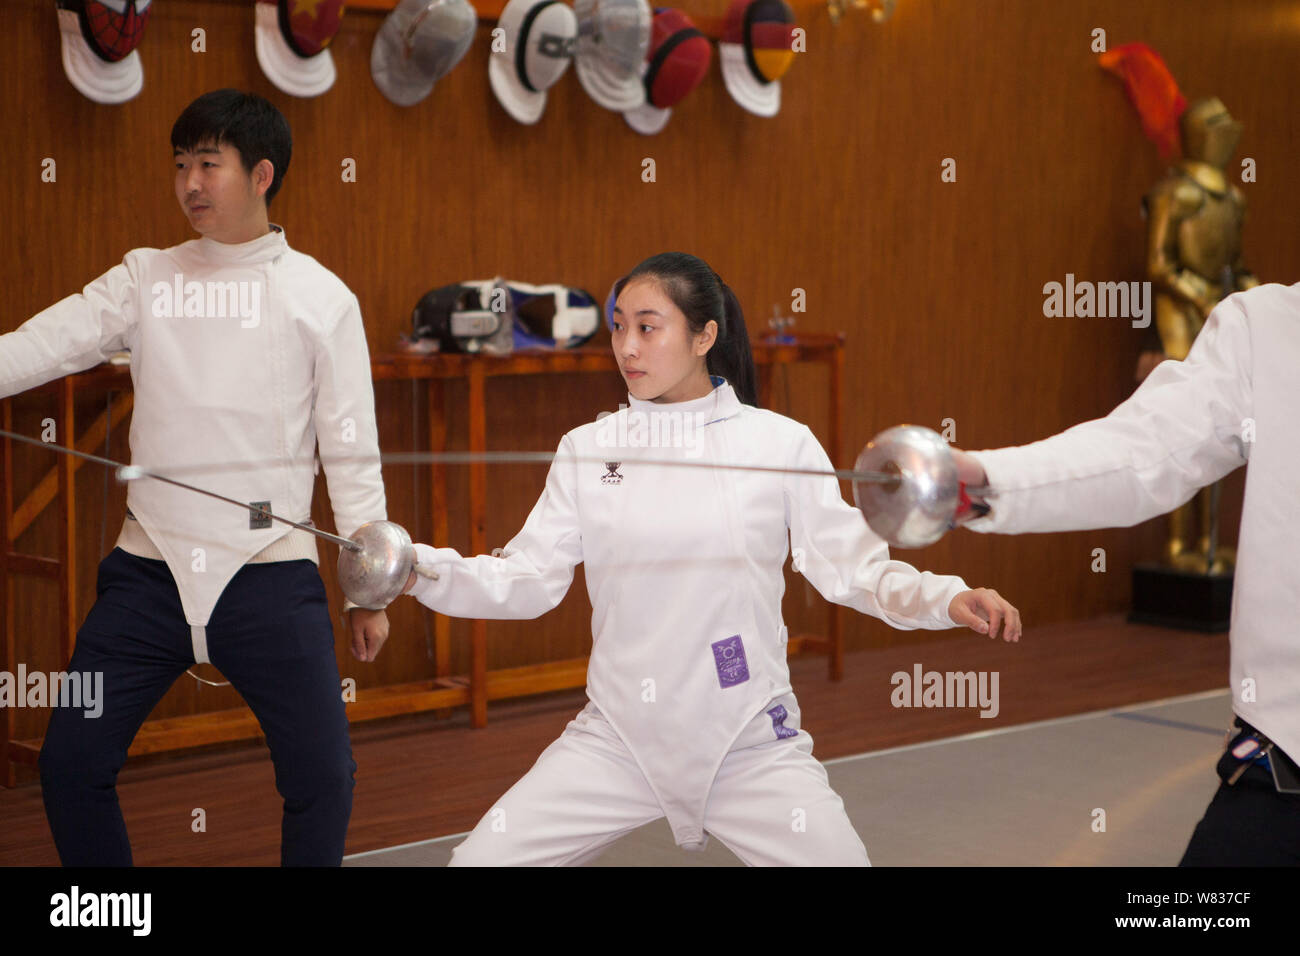 Chinese fencing trainer Mou Jiahui, center, instructs fencing skills to learners at her training center in Jilin city, northeast China's Jilin provinc Stock Photo